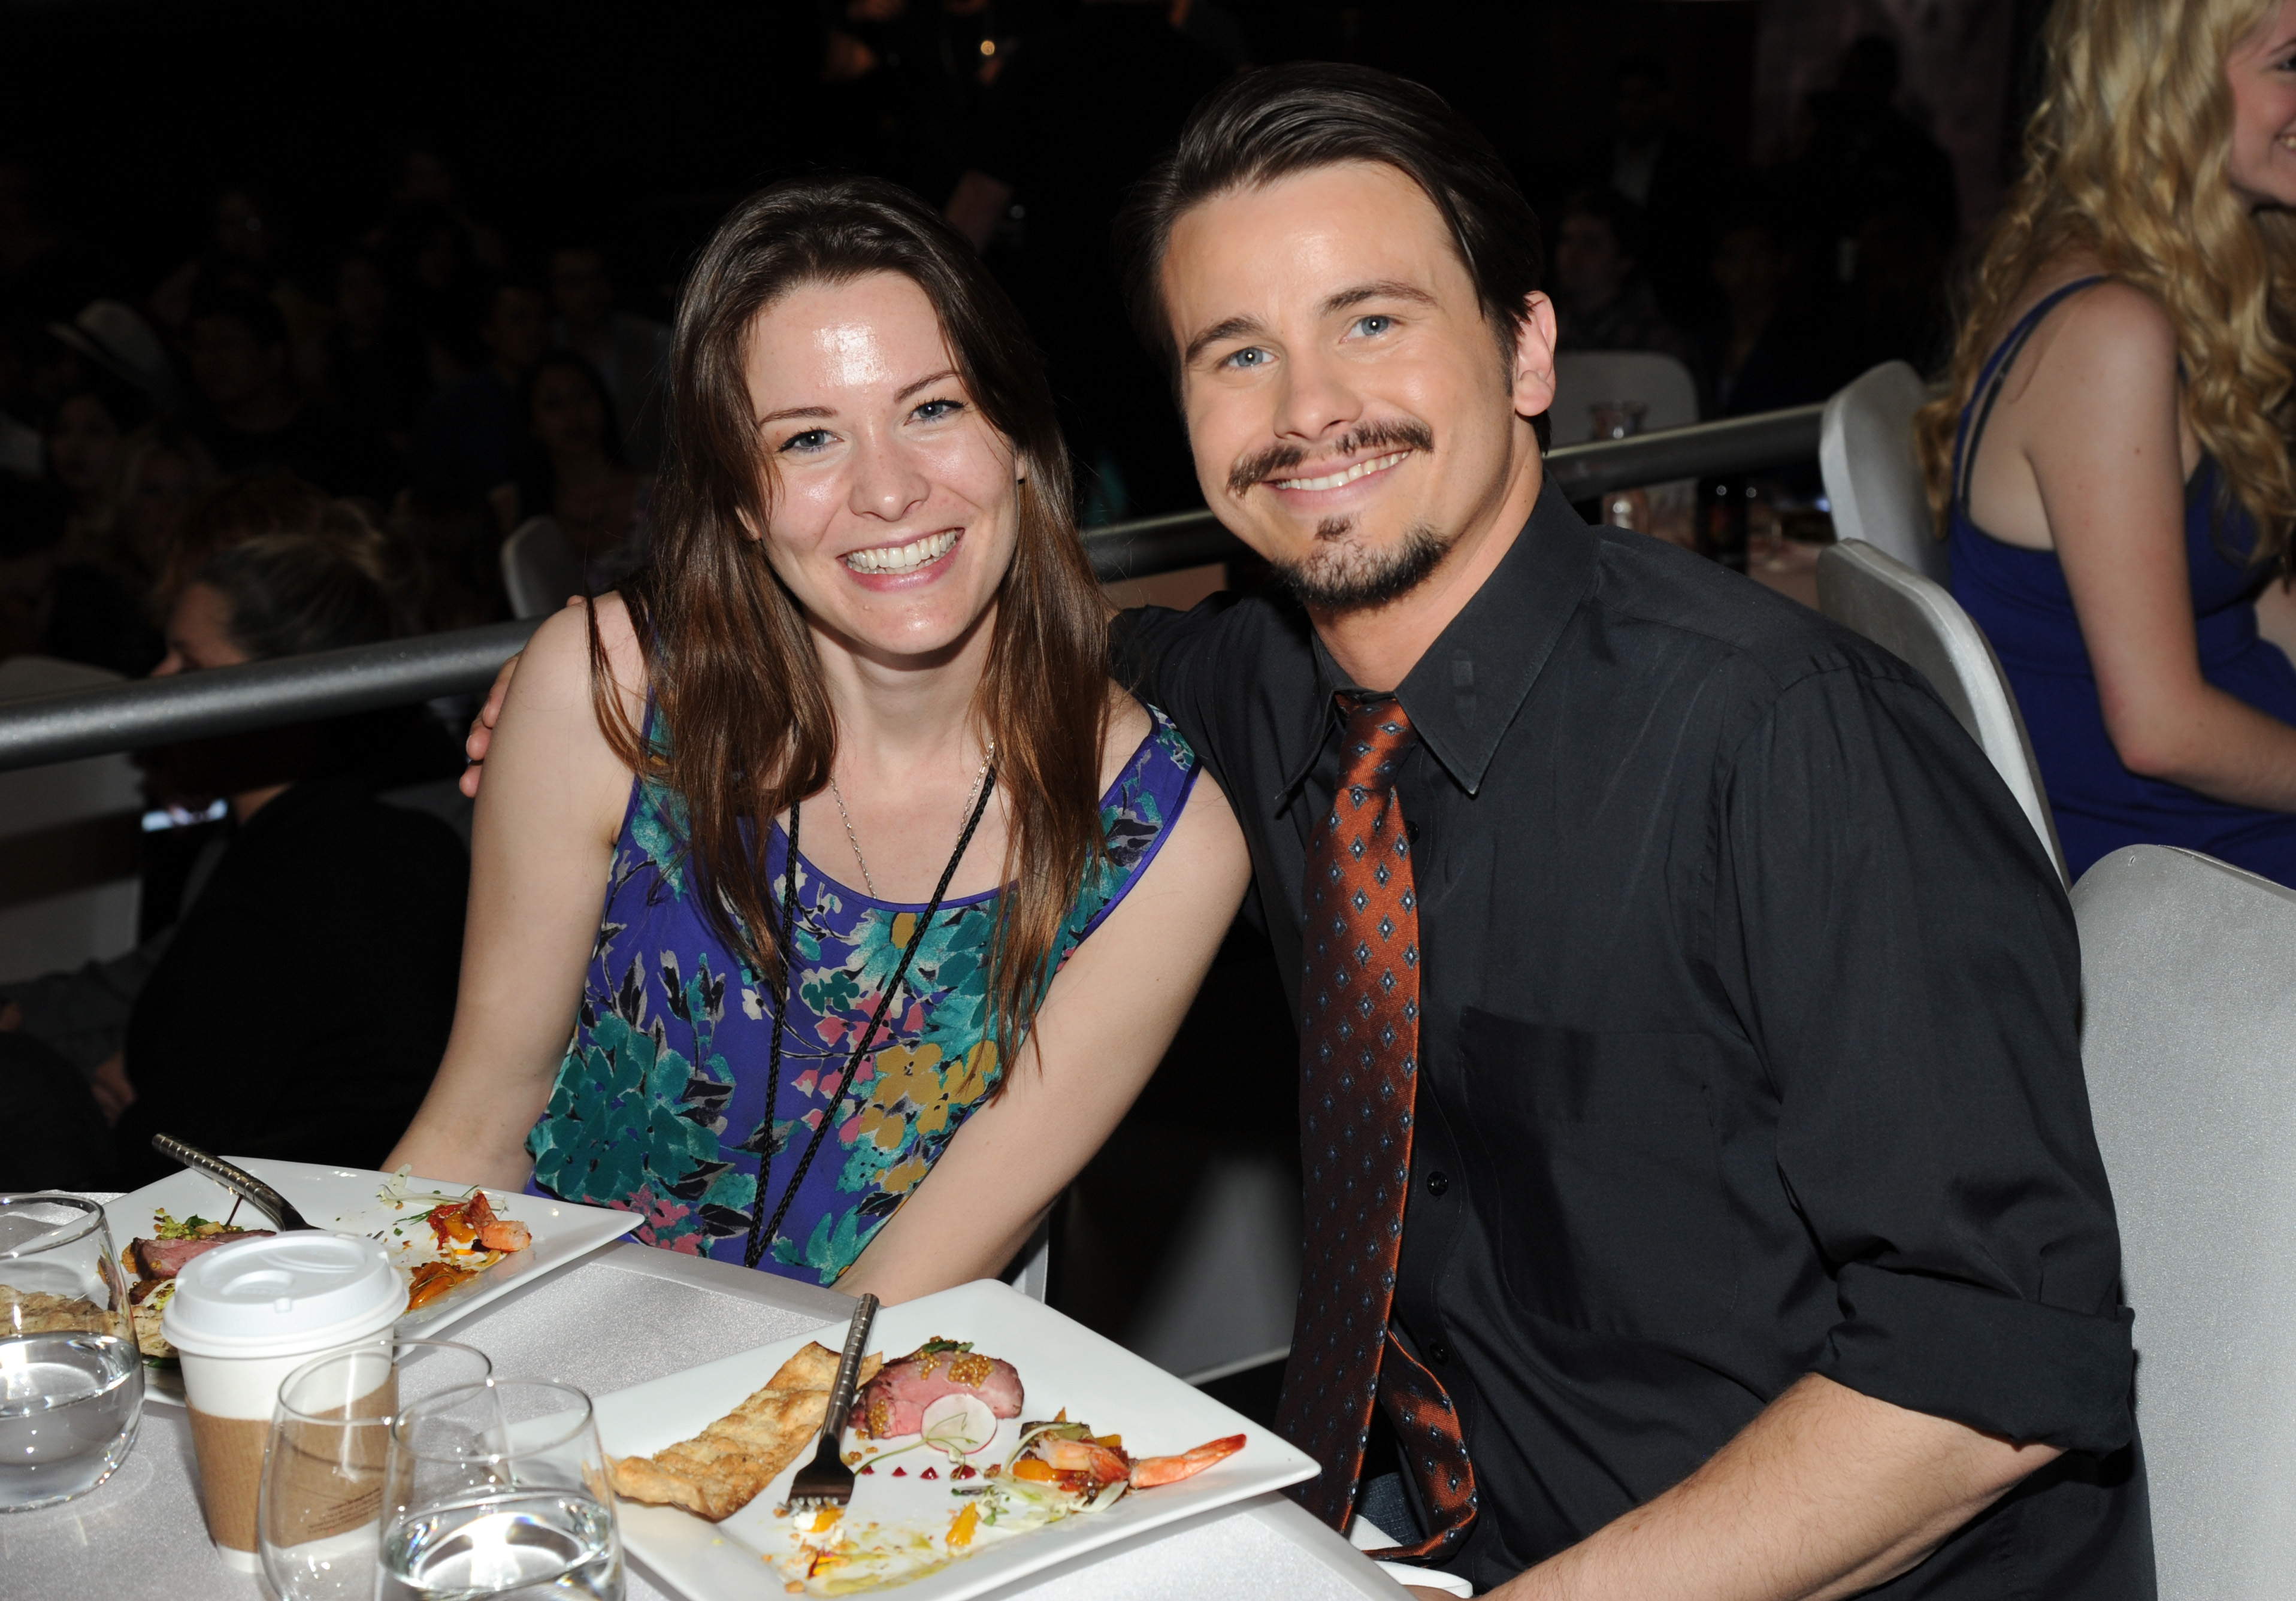 Carly Ritter (L) and her brother actor Jason Ritter in the audience at the 2014 iHeartRadio Music Awards held at The Shrine Auditorium on May 1, 2014 in Los Angeles, California. | Source: Getty Images